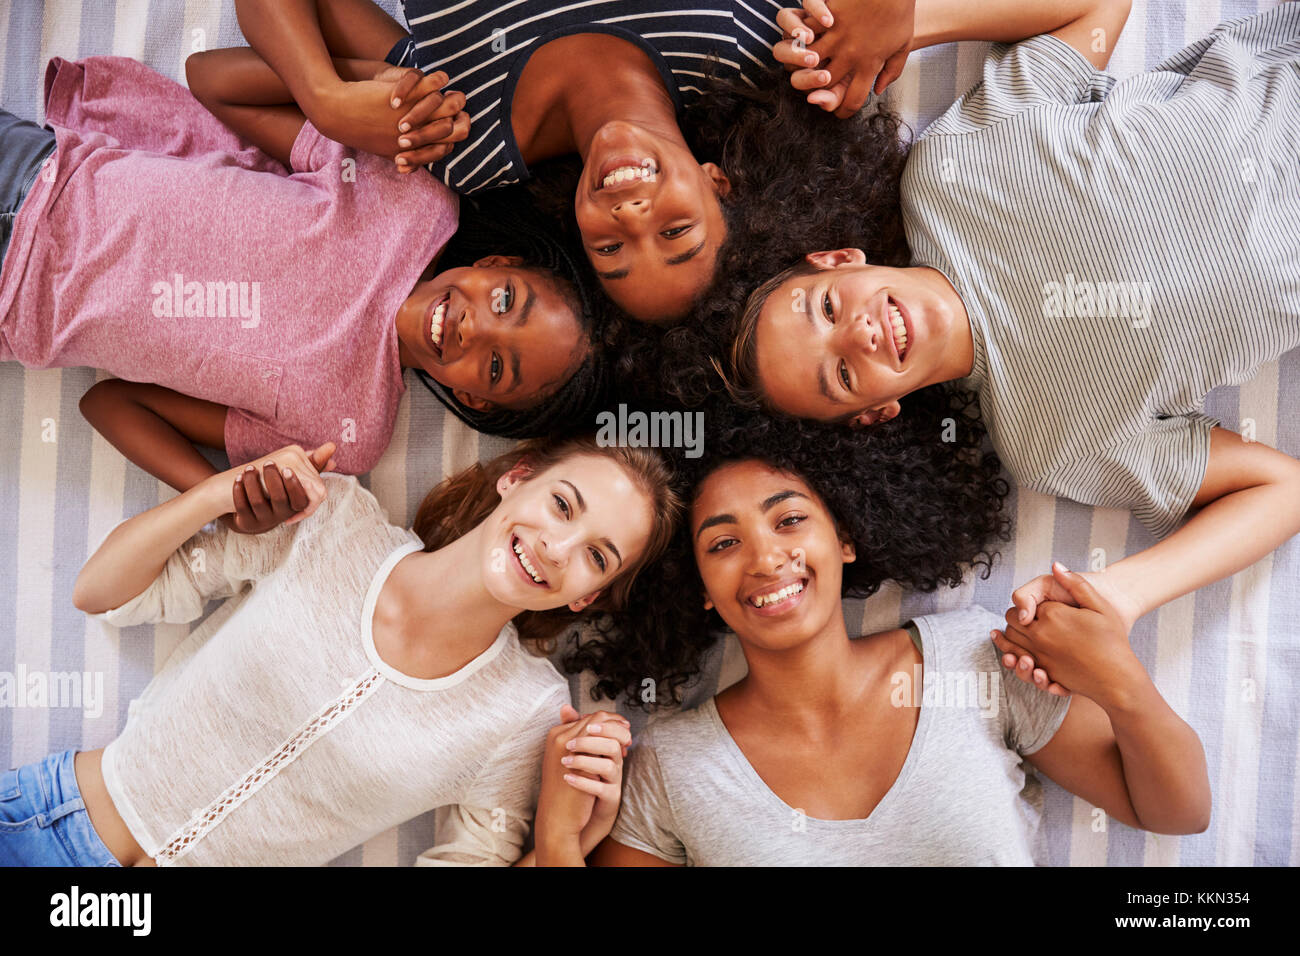 Overhead View Of Teenage Friends Lying On Bed Together Stock Photo